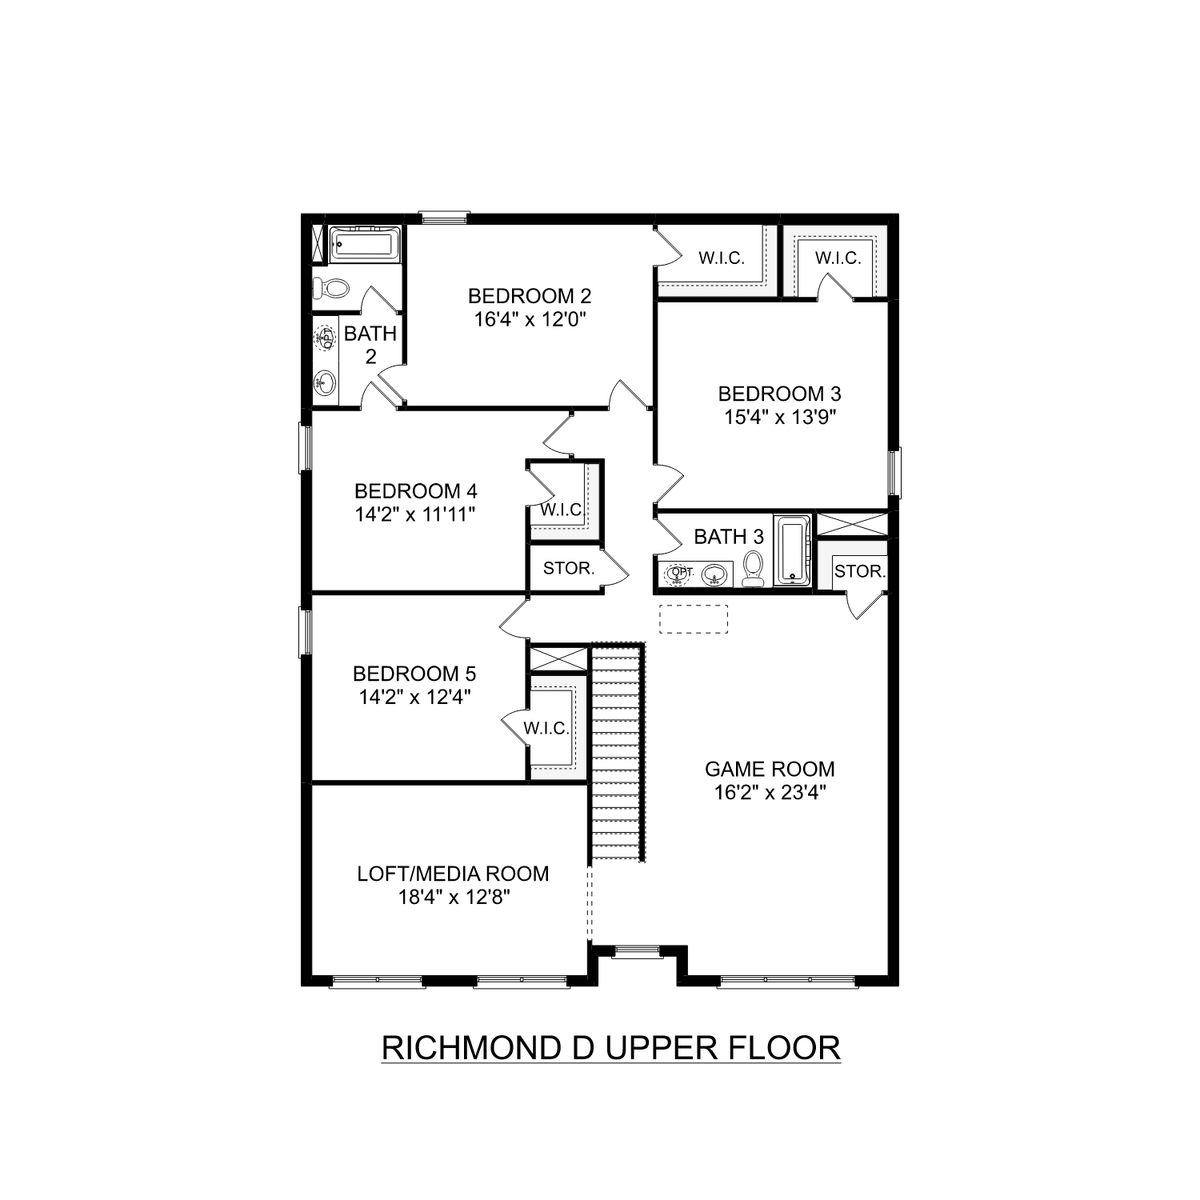 2 - The Richmond D buildable floor plan layout in Davidson Homes' Williams Pointe community.